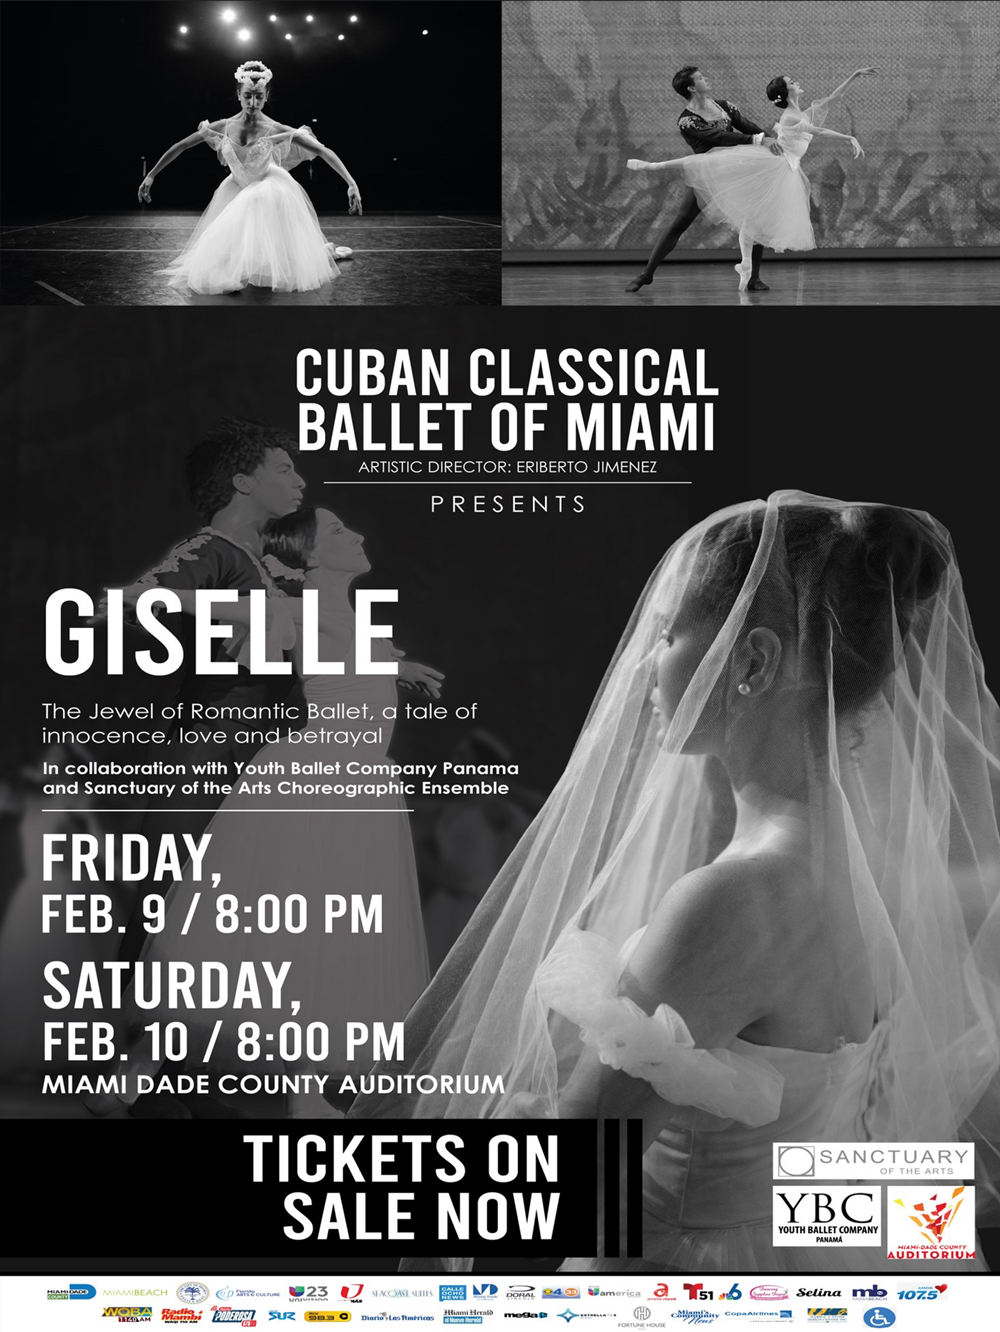 Cuban Classical Ballet of Miami presents Giselle